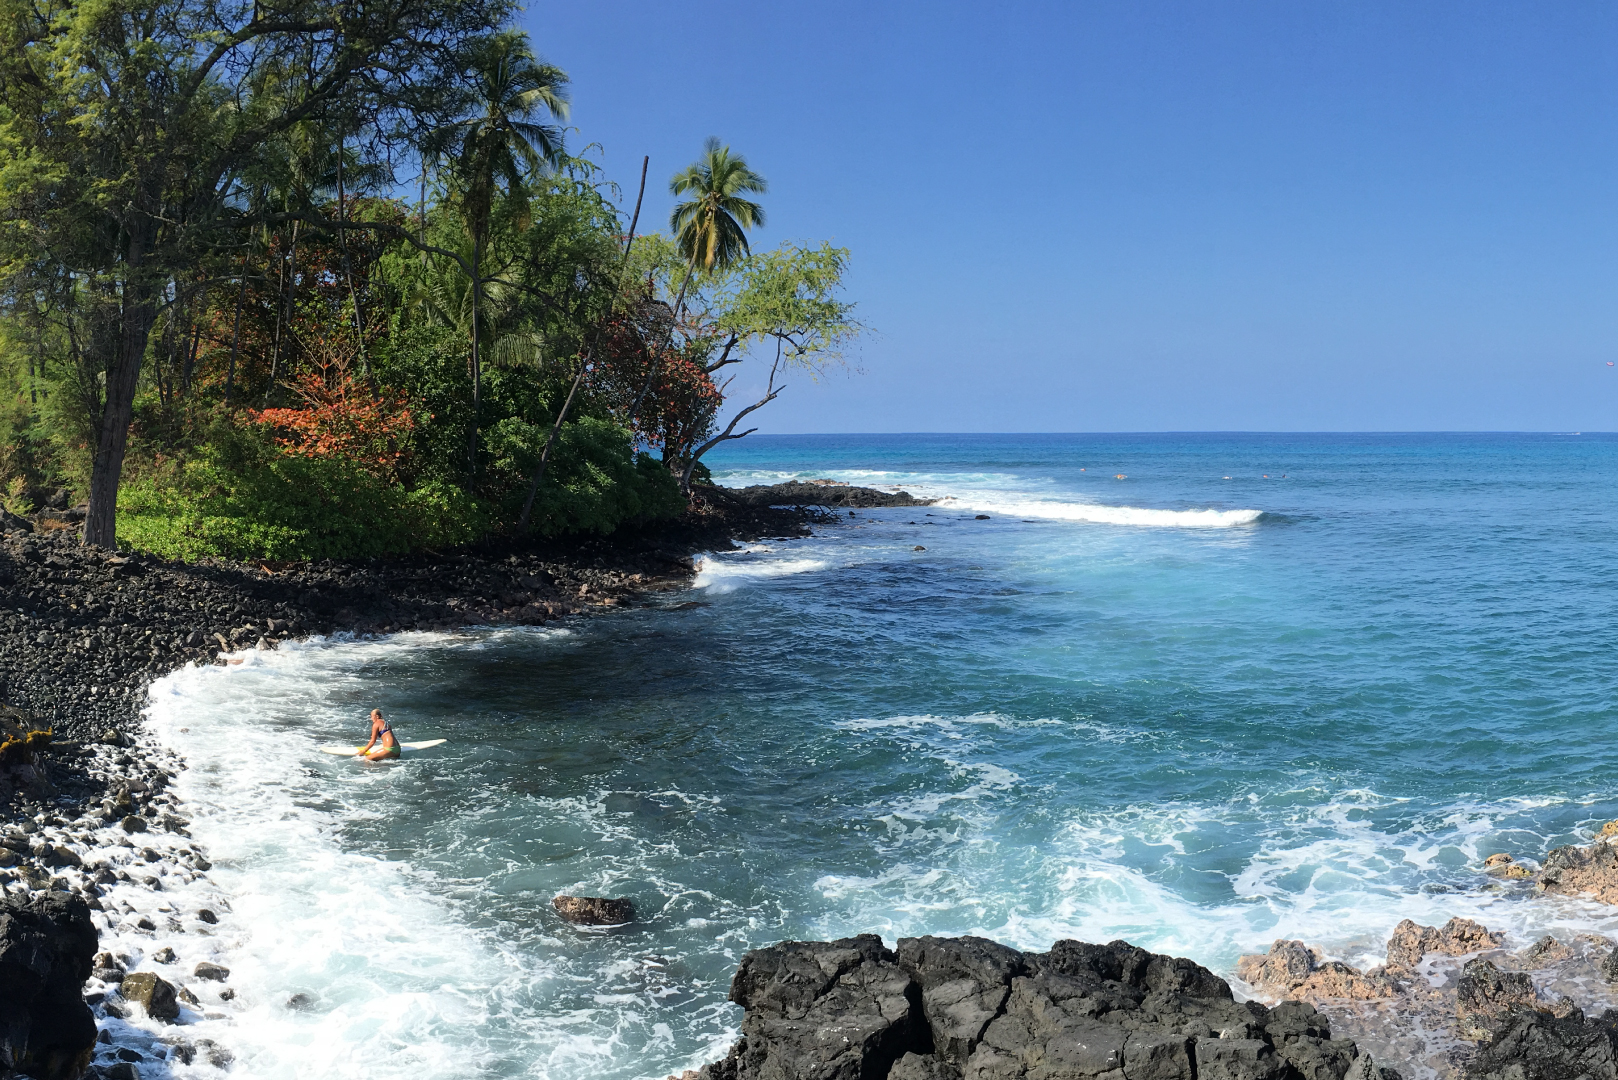 A view of the Kamoa Point surfbreak known as Lymans located in front of the house